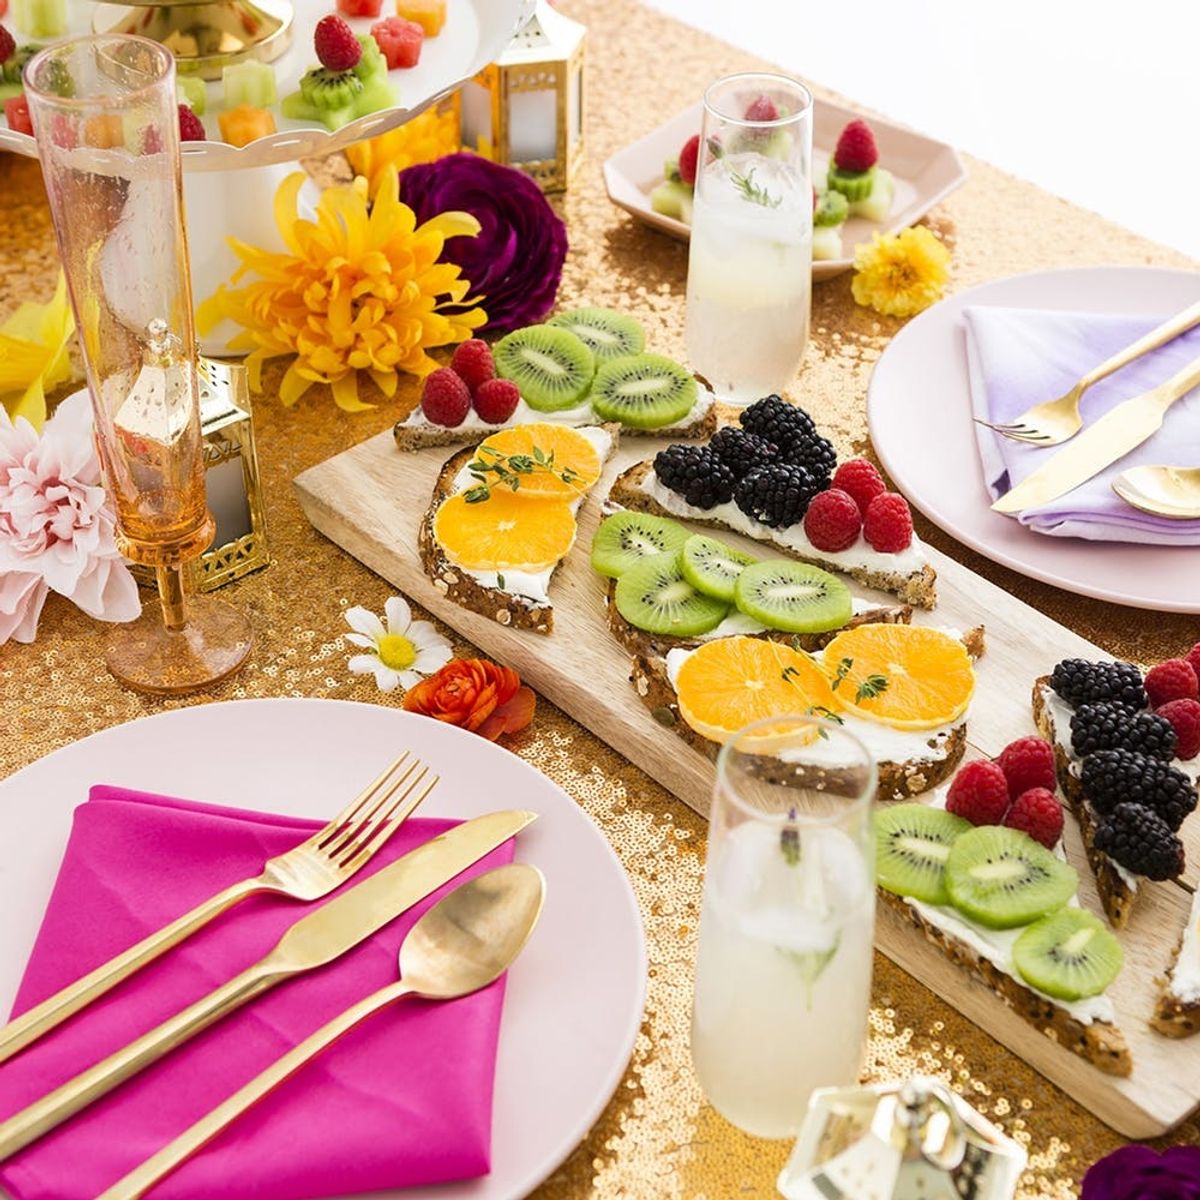 Bring Out Your Inner Rapunzel With This Disney Tangled-Inspired Boho Brunch